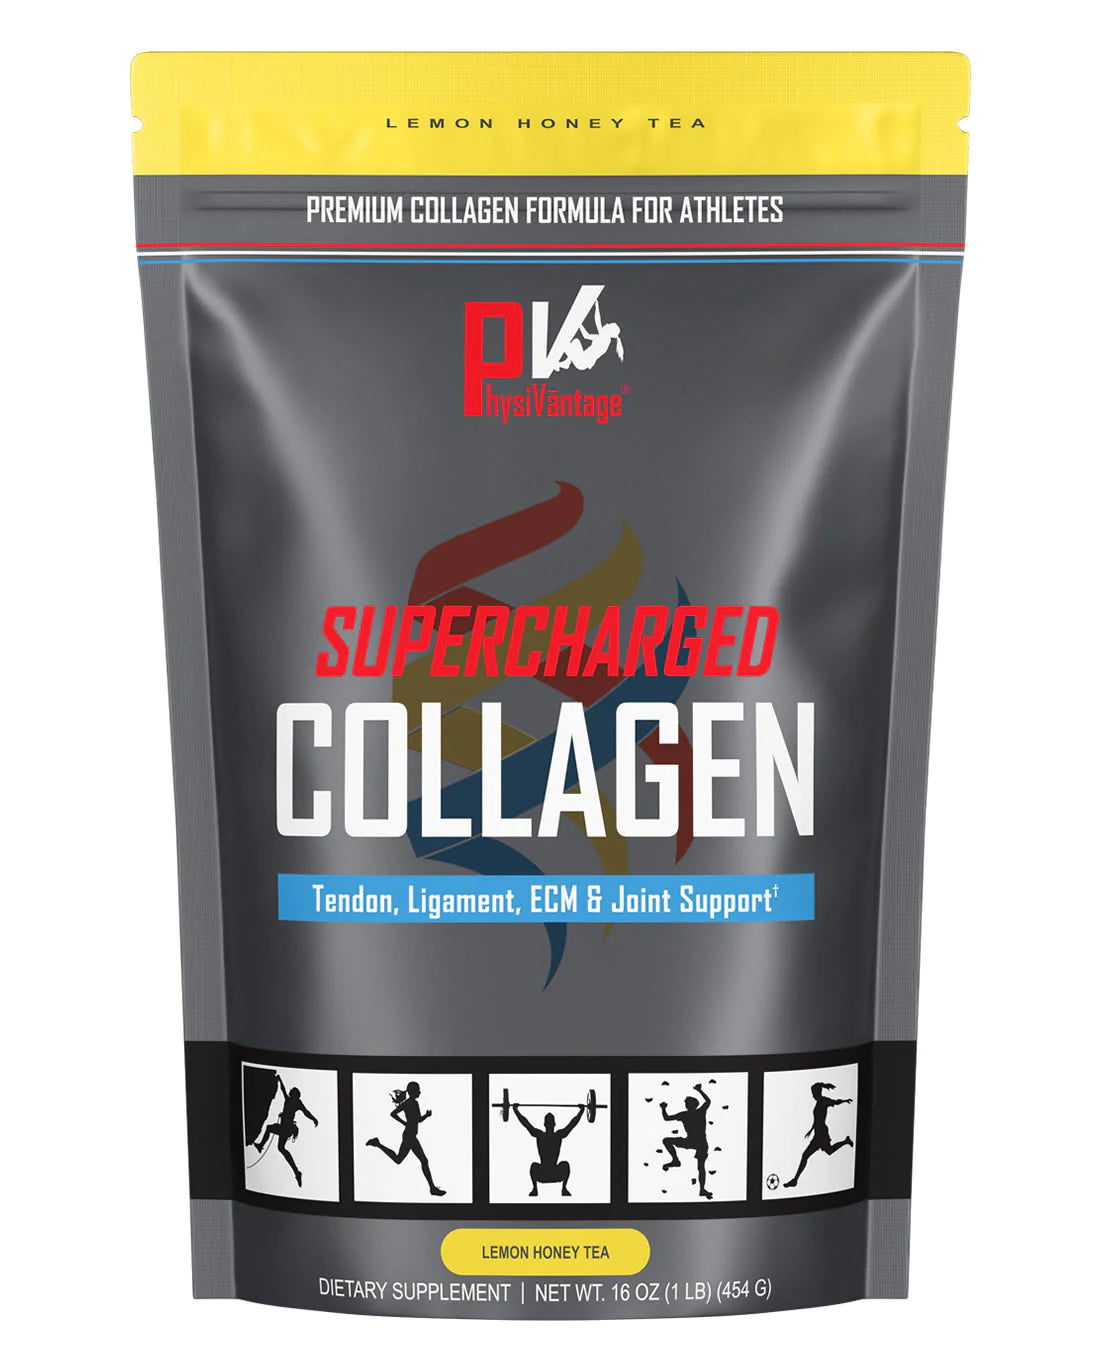 SUPERCHARGED COLLAGEN